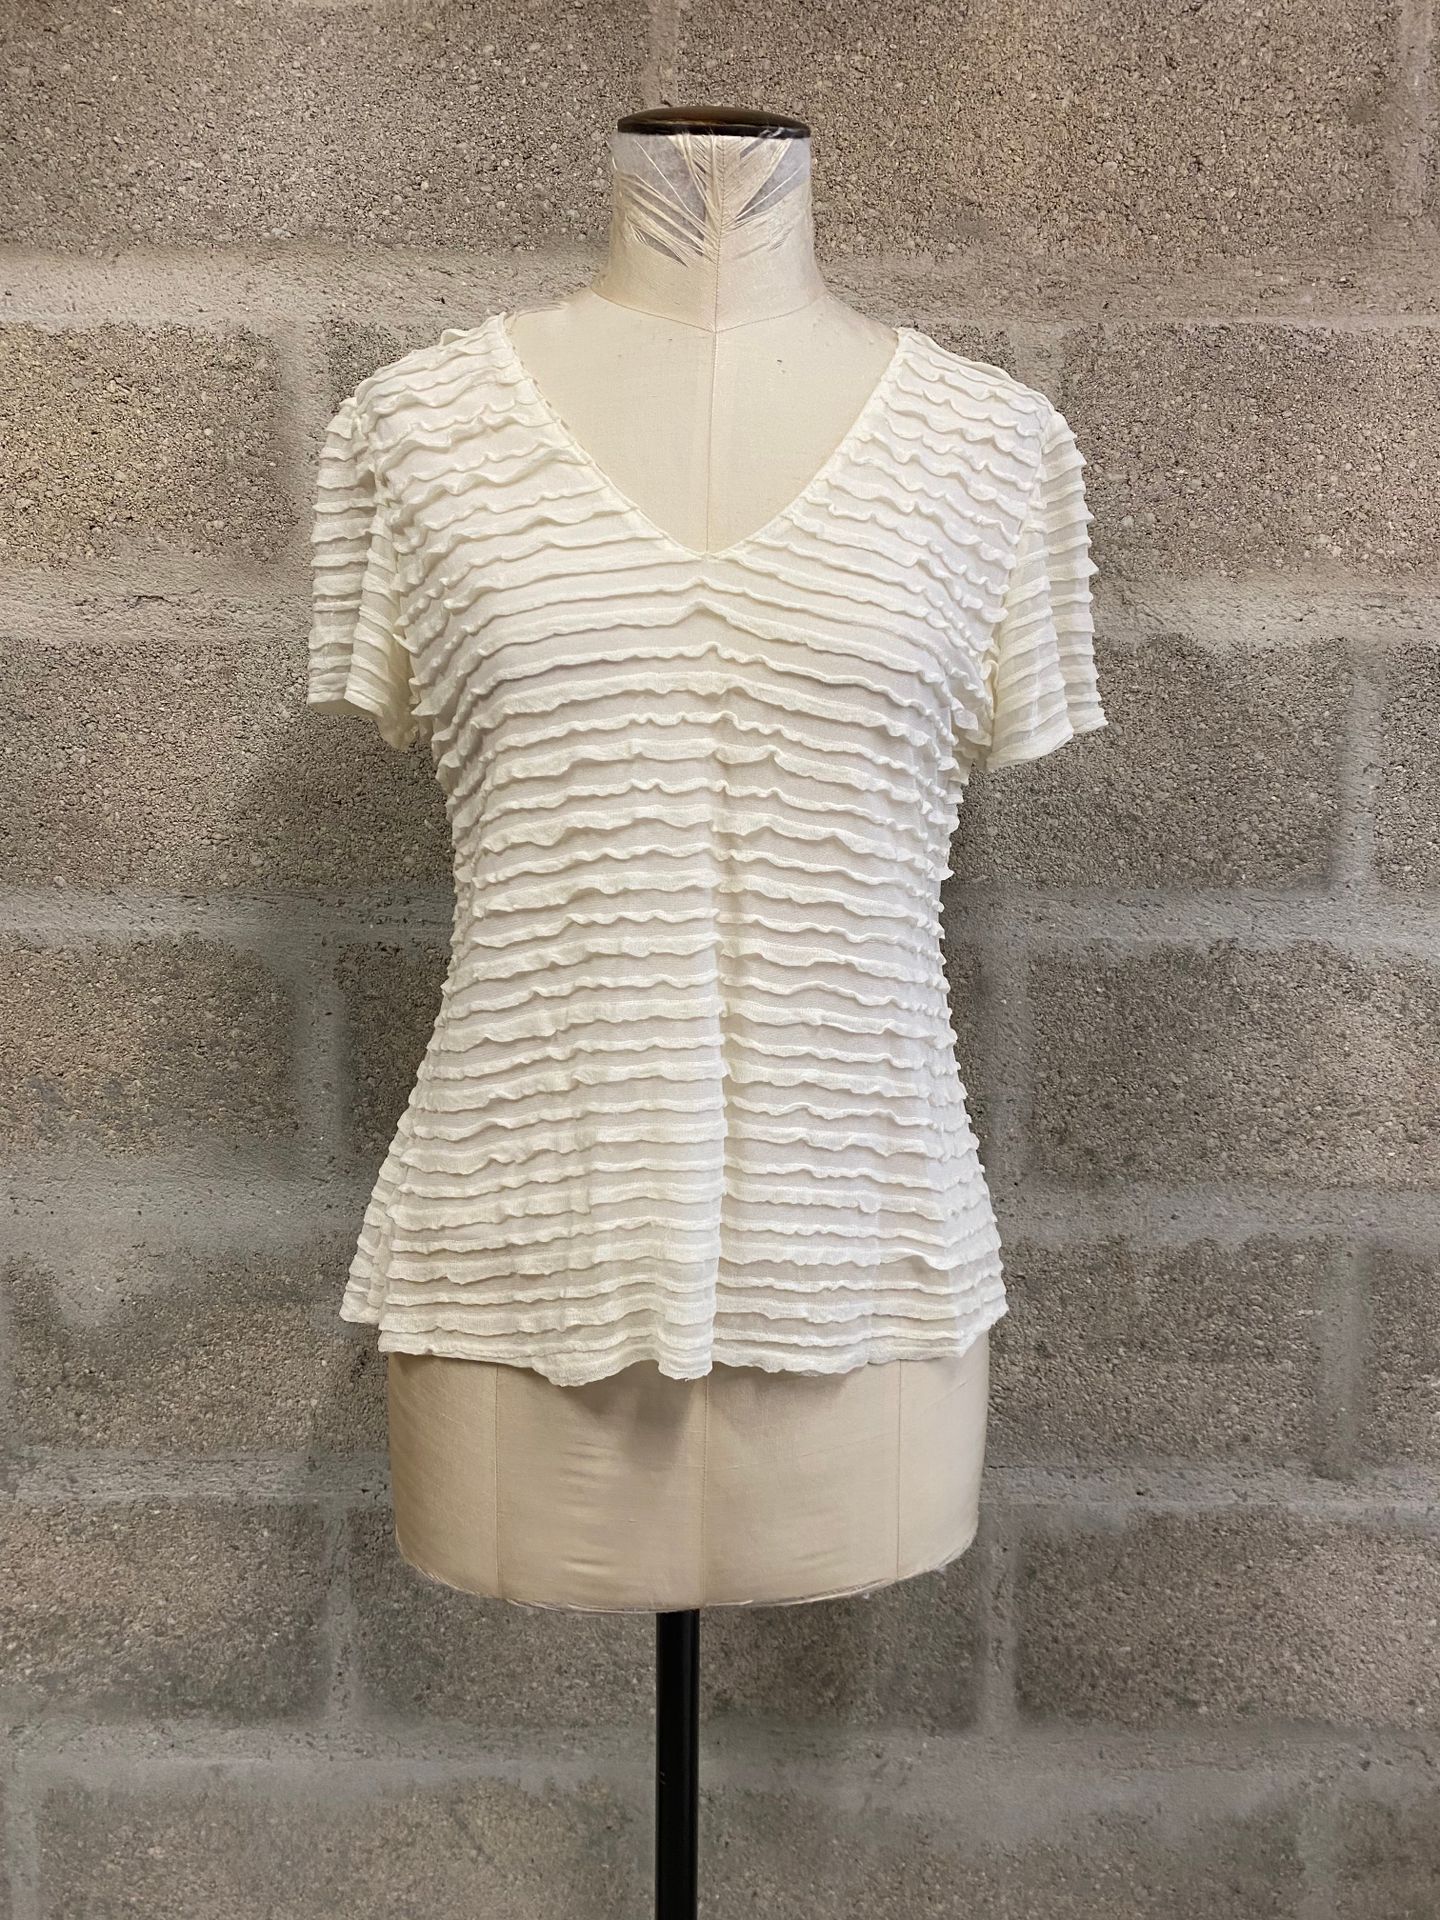 Null Lot including: 

- ANNA KASZER, White ruffled short sleeve top with V-neckl&hellip;